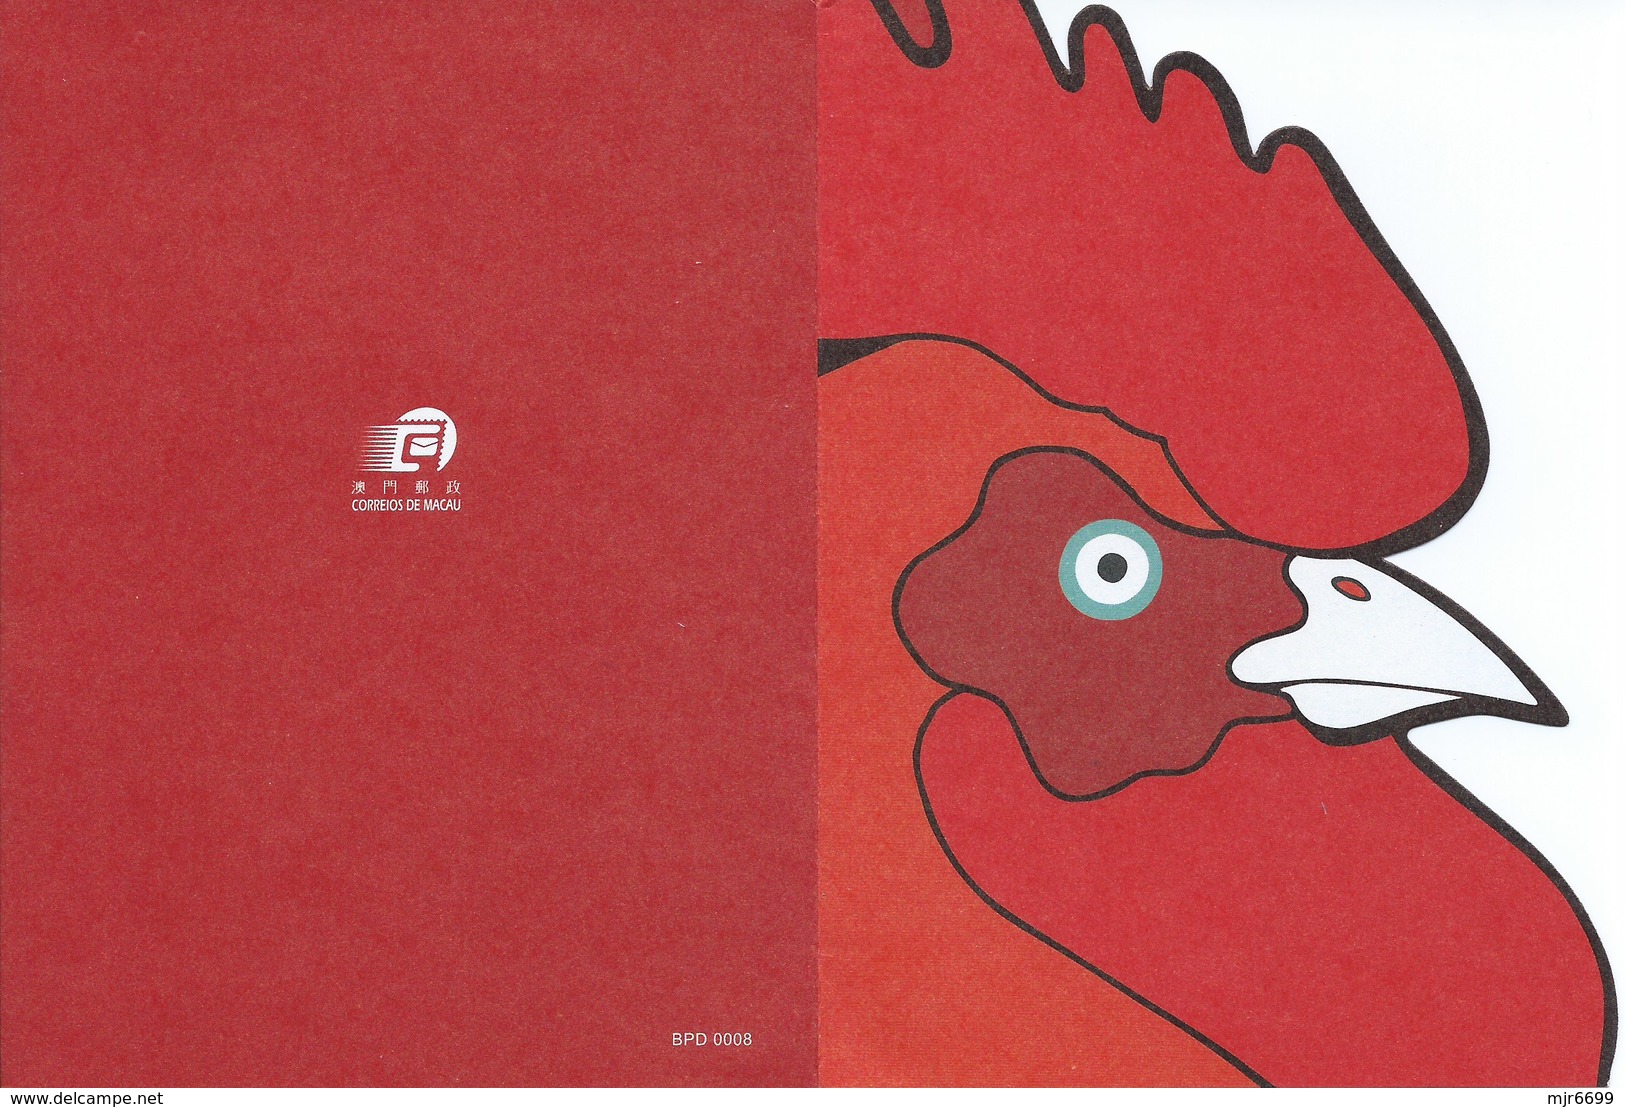 MACAU 2005 LUNAR NEW YEAR OF THE COCK GREETING CARD & POSTAGE PAID COVER, POST OFFICE CODE #BPD008 - Postal Stationery